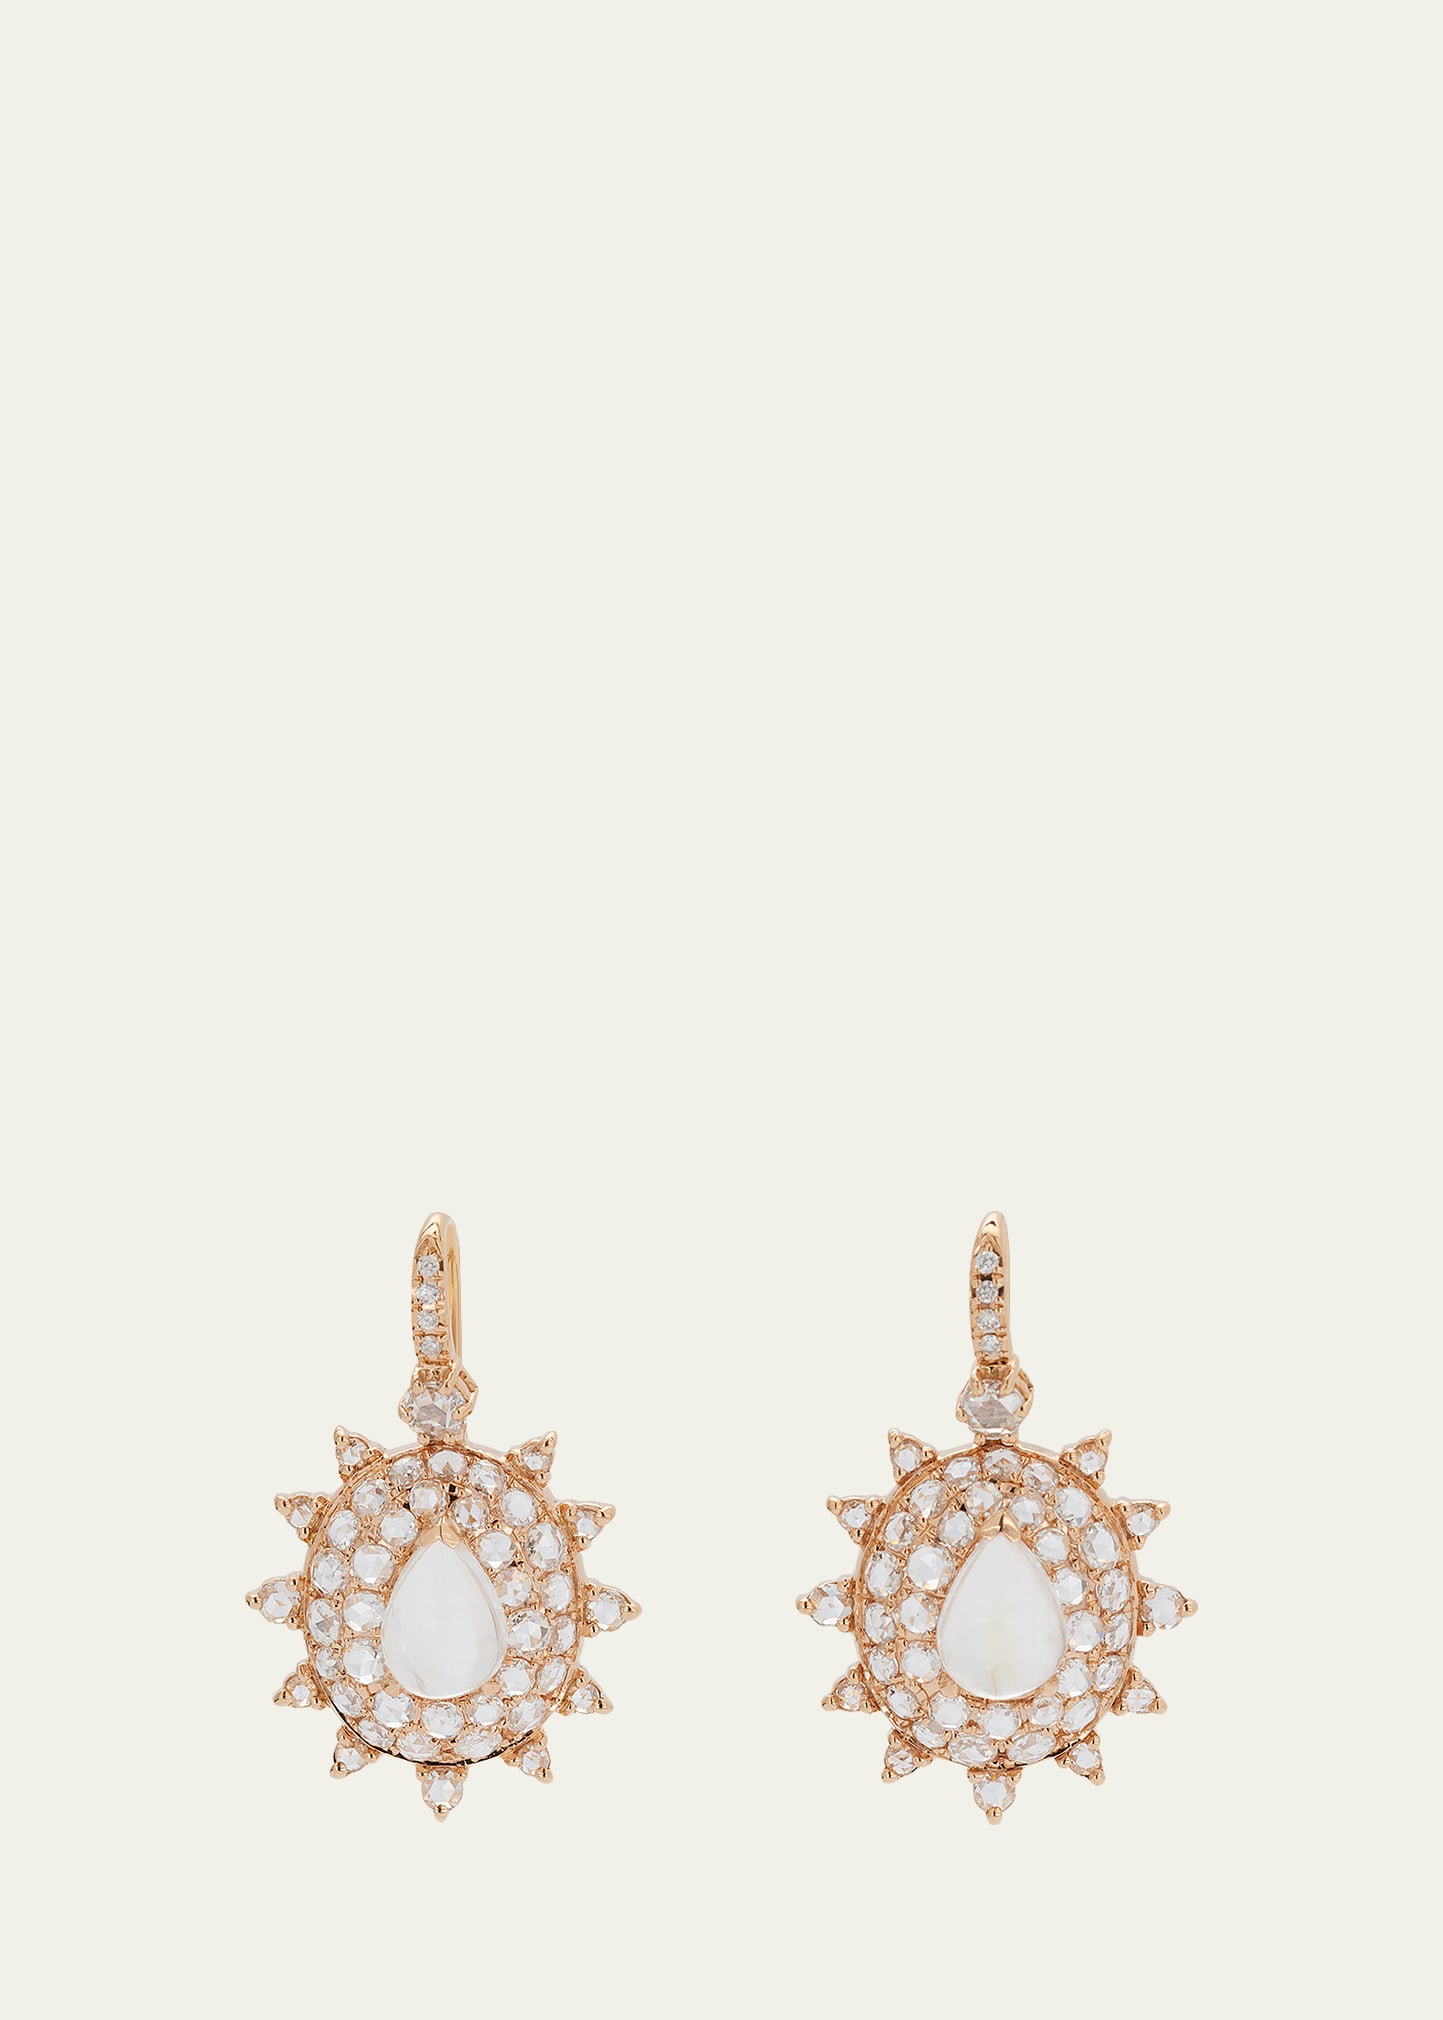 Pink Gold Drop Earrings With Diamonds and Moonstone